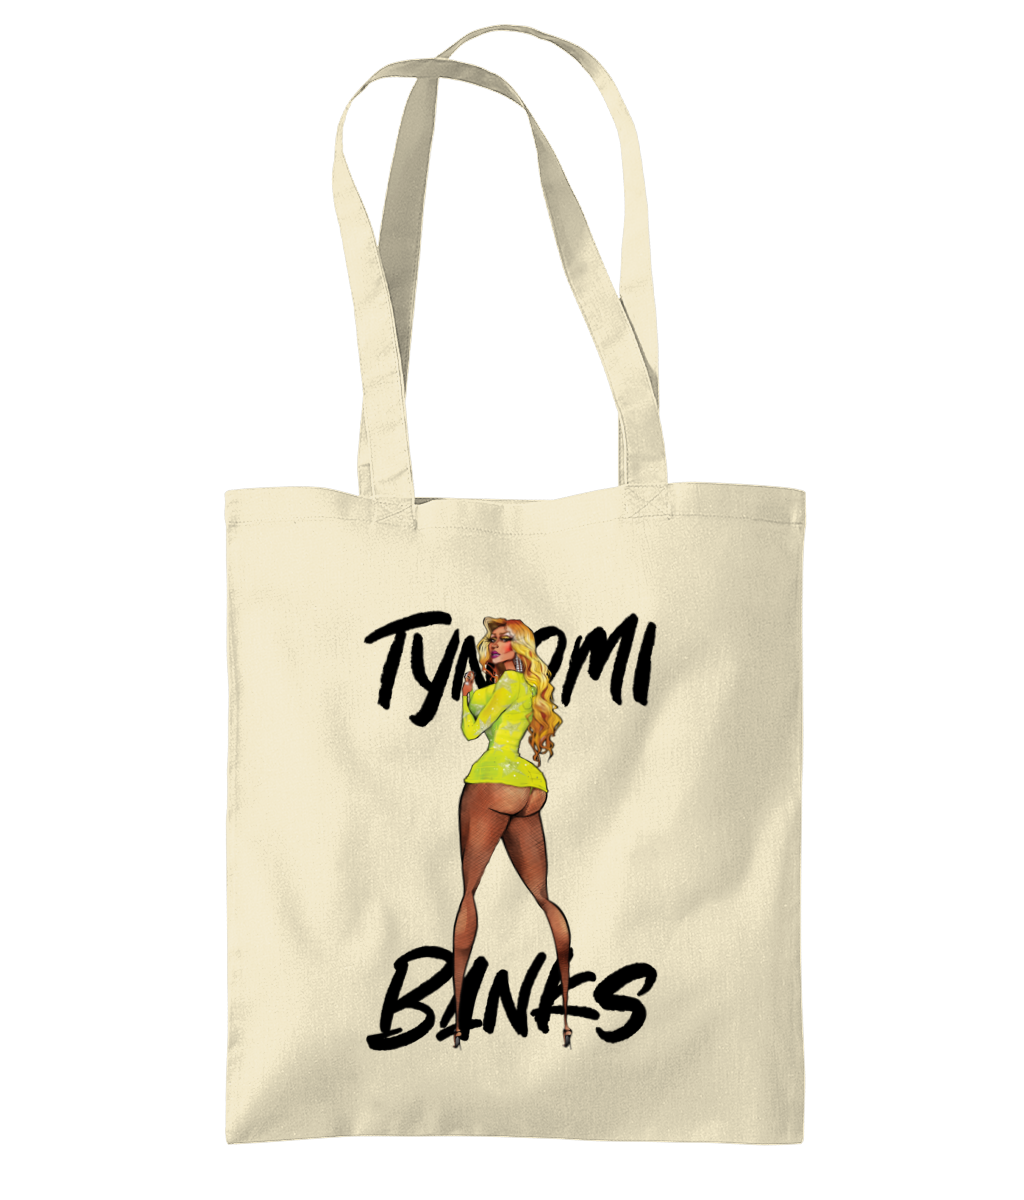 Tynomi Banks - Tote Bag - SNATCHED MERCH